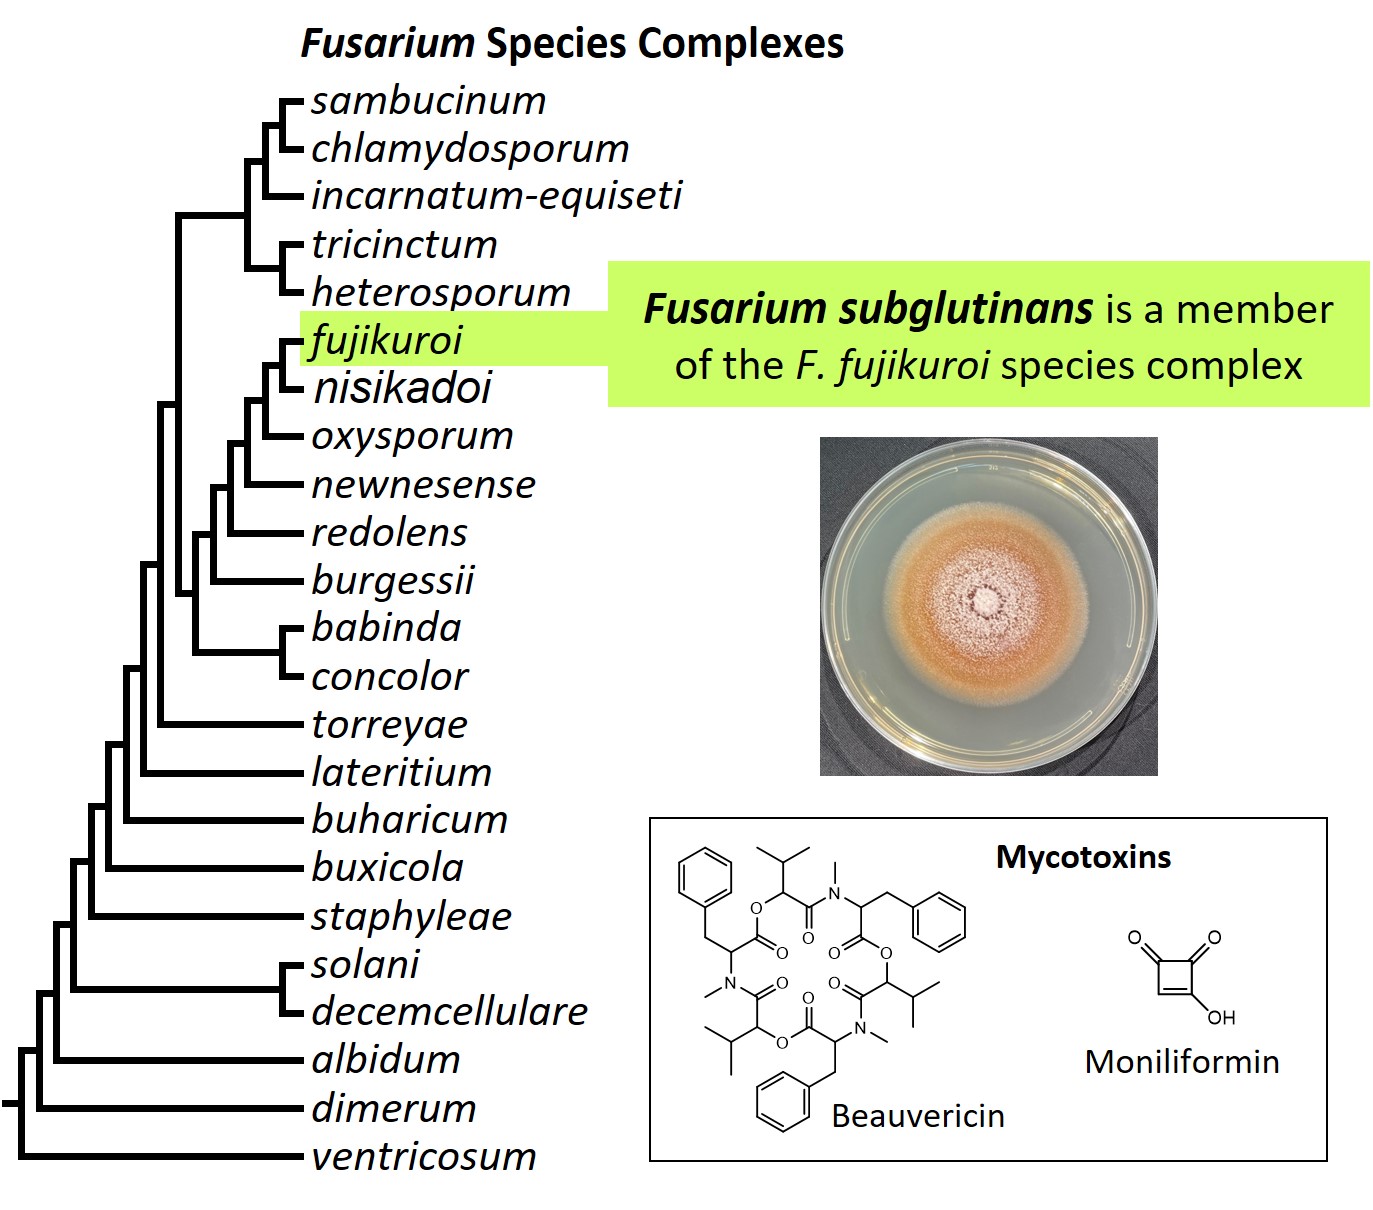 Left &ndash; tree showing phylogenetic relationships of the 23
Fusarium species complexes and placement of F. subglutinans within
the F. fujikuroi species complex. In the tree, species complex
names are abbreviated using specific epithets of the species after
which the complexes are named (e.g., the F. sambucinum species
complex is abbreviated as sambucinum). Middle right &ndash; culture
of F. subglutinans NRRL 66333 growing on potato dextrose agar
medium. Bottom right &ndash; chemical structures of the mycotoxins
beauvericin and moniliformin. Image credit: Robert H. Proctor, Amy
McGovern and Crystal Probyn.